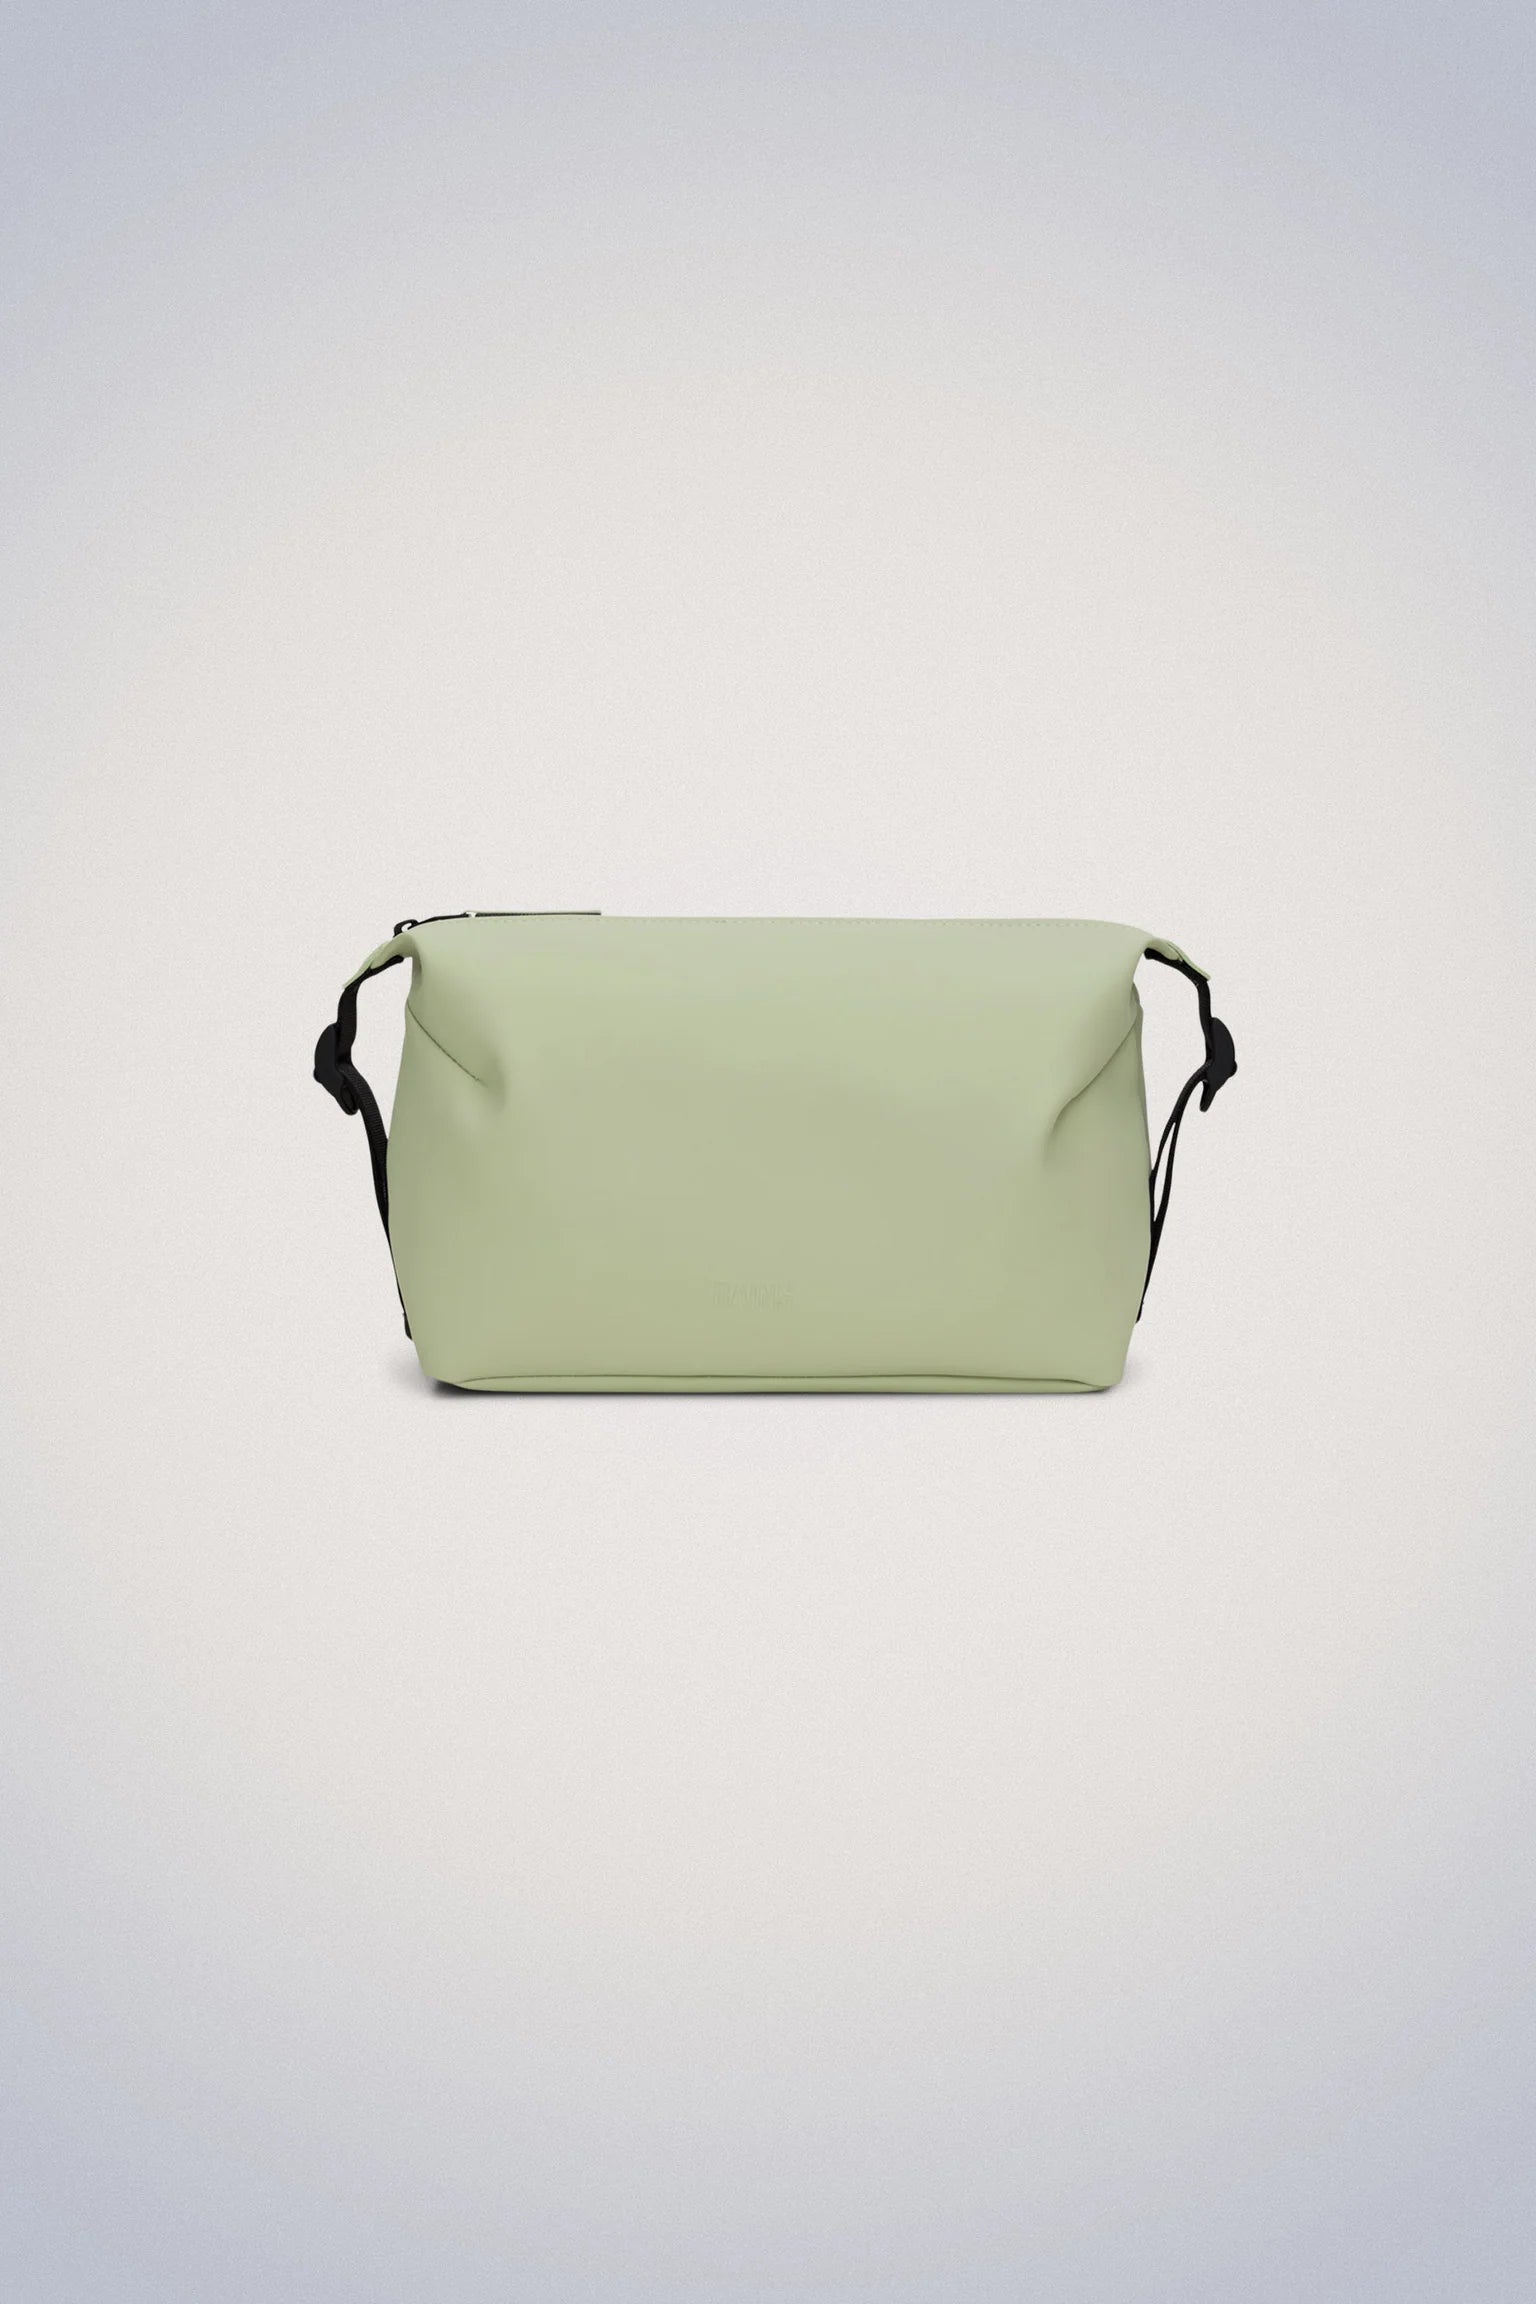 A Rains Hilo Wash Bag - Earth, a green toiletry bag with a waterproof design, on a white background.